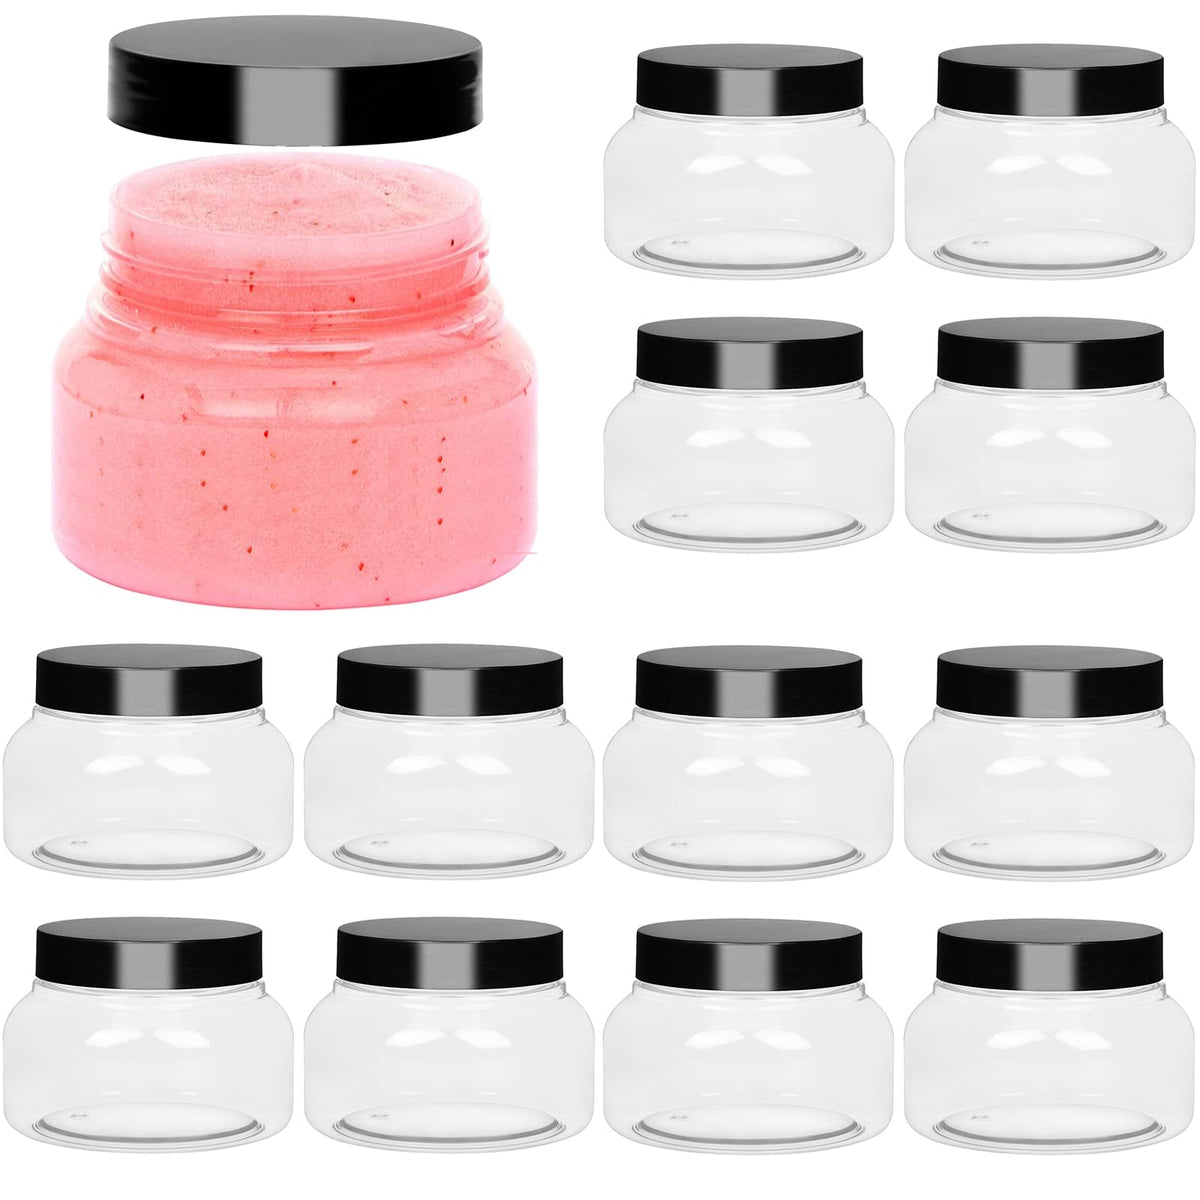 Set of 3 Plastic 6 oz. clear jars with colorful plastic lid-Storage Jar  Container-DIY body butter, body scrub, sugar scrub, slime container